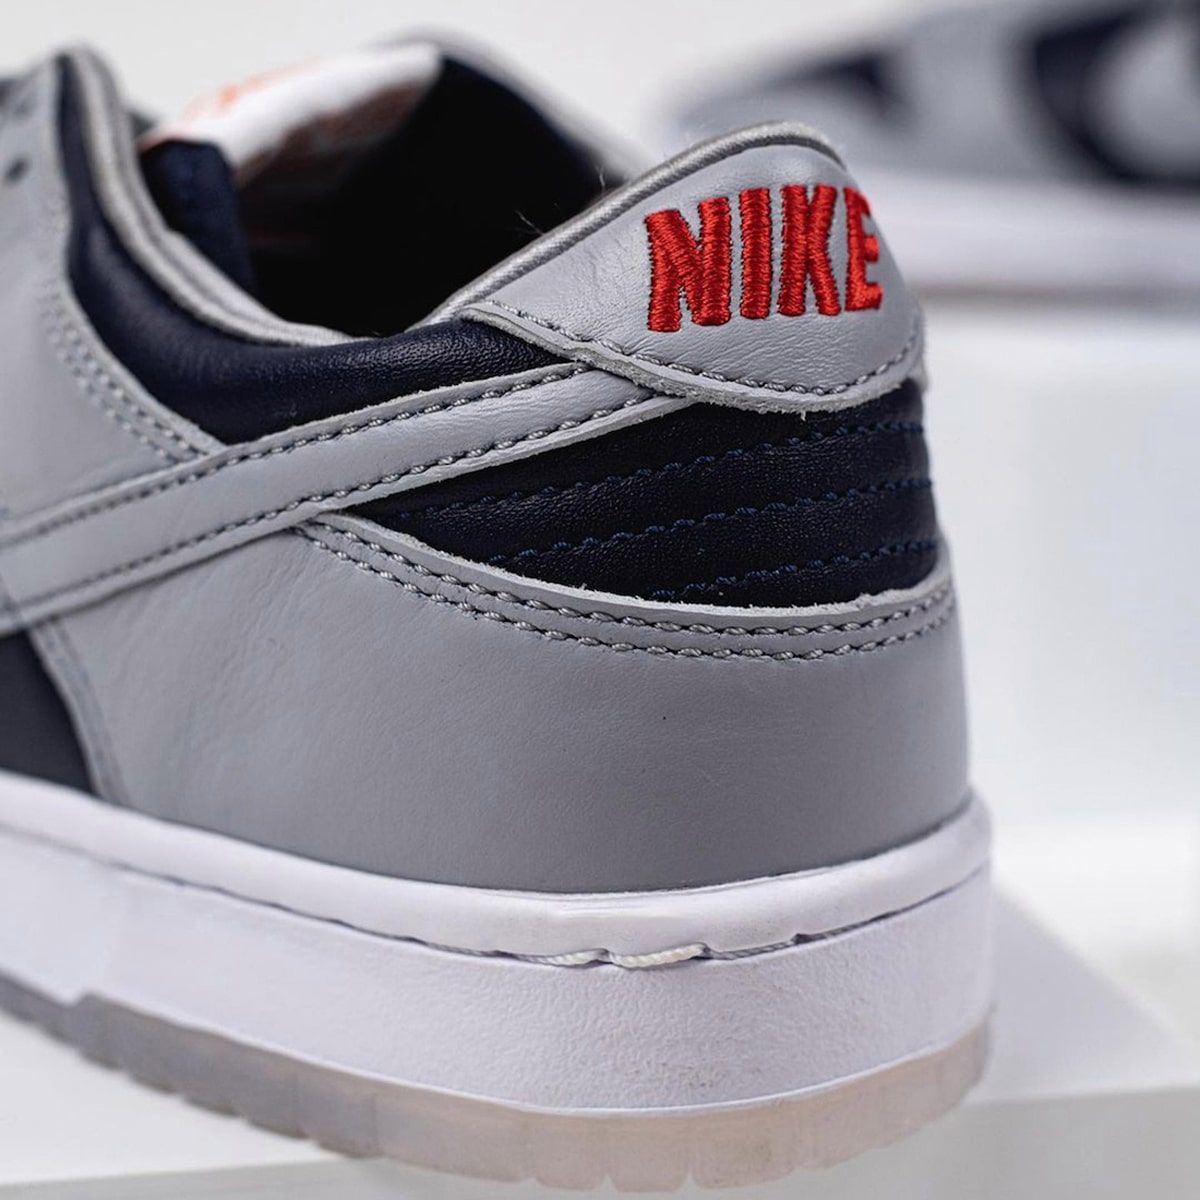 Where to Buy the Premium Nike Dunk Low 